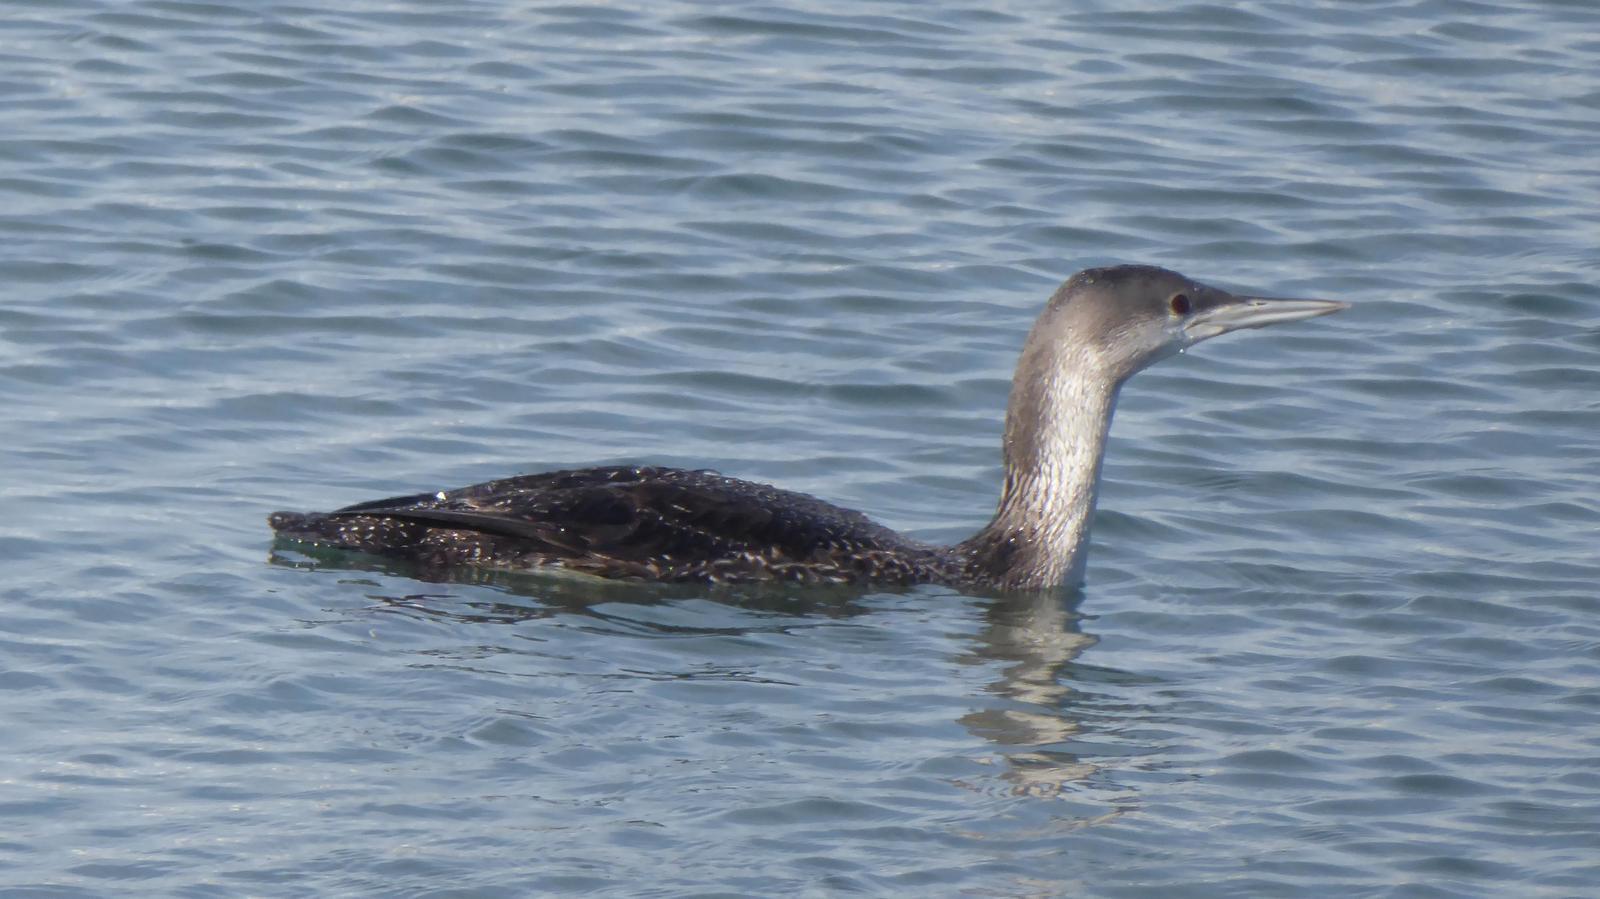 Pacific Loon Photo by Daliel Leite